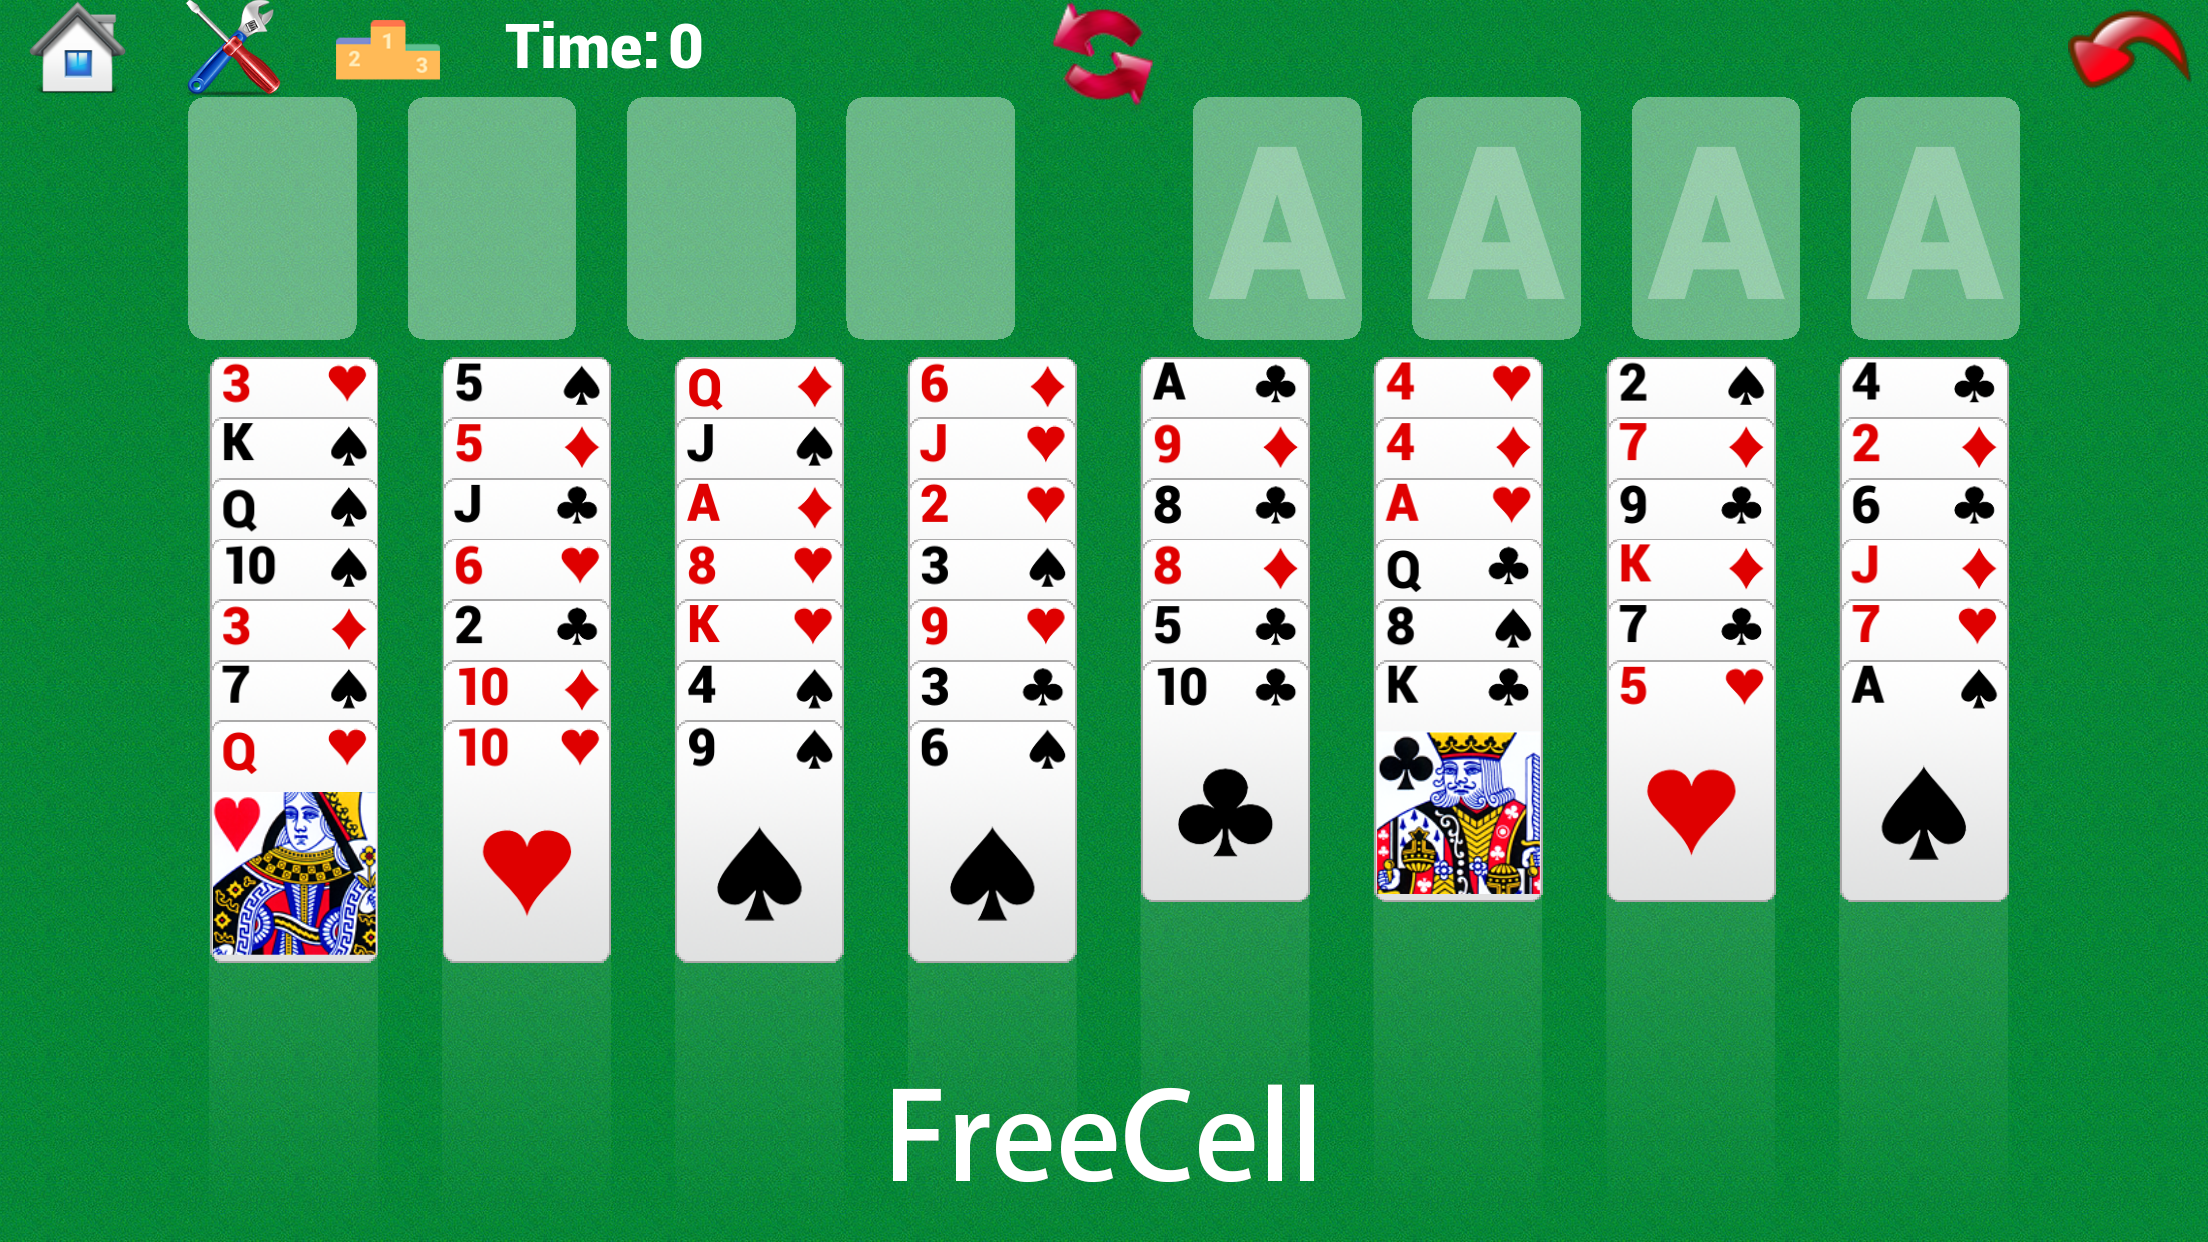 Android application Spider Solitaire screenshort